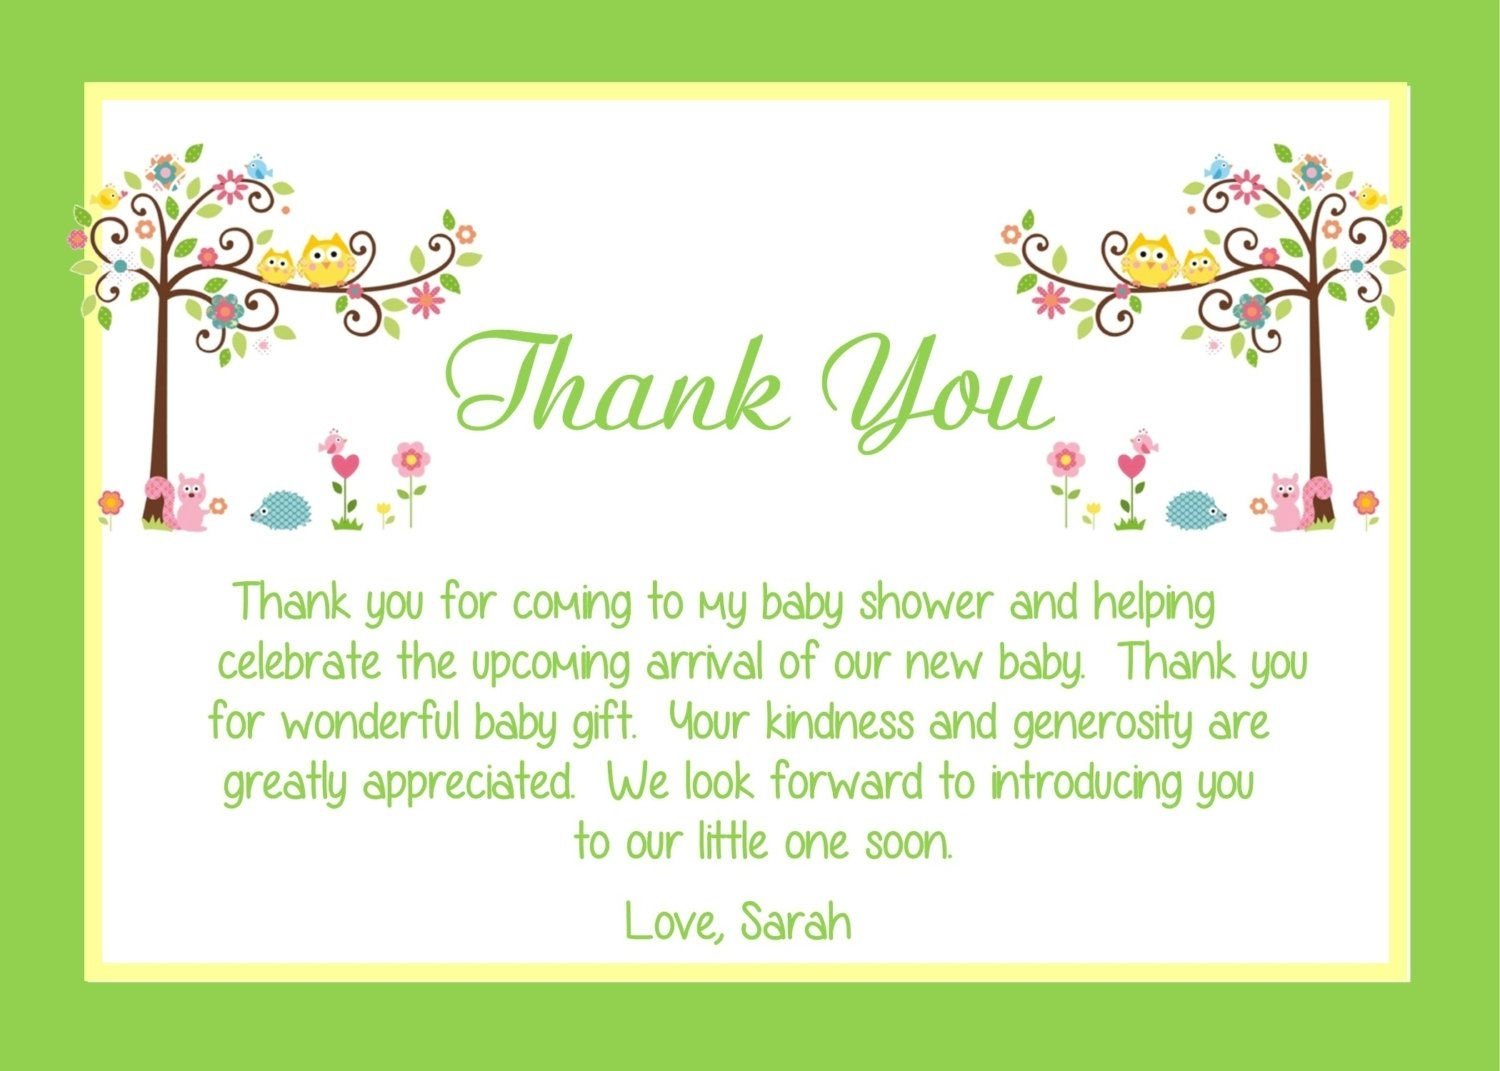 10 Cute Baby Shower Thank You Wording Ideas baby shower thank you card wording ideas babysof thank you 1 2022